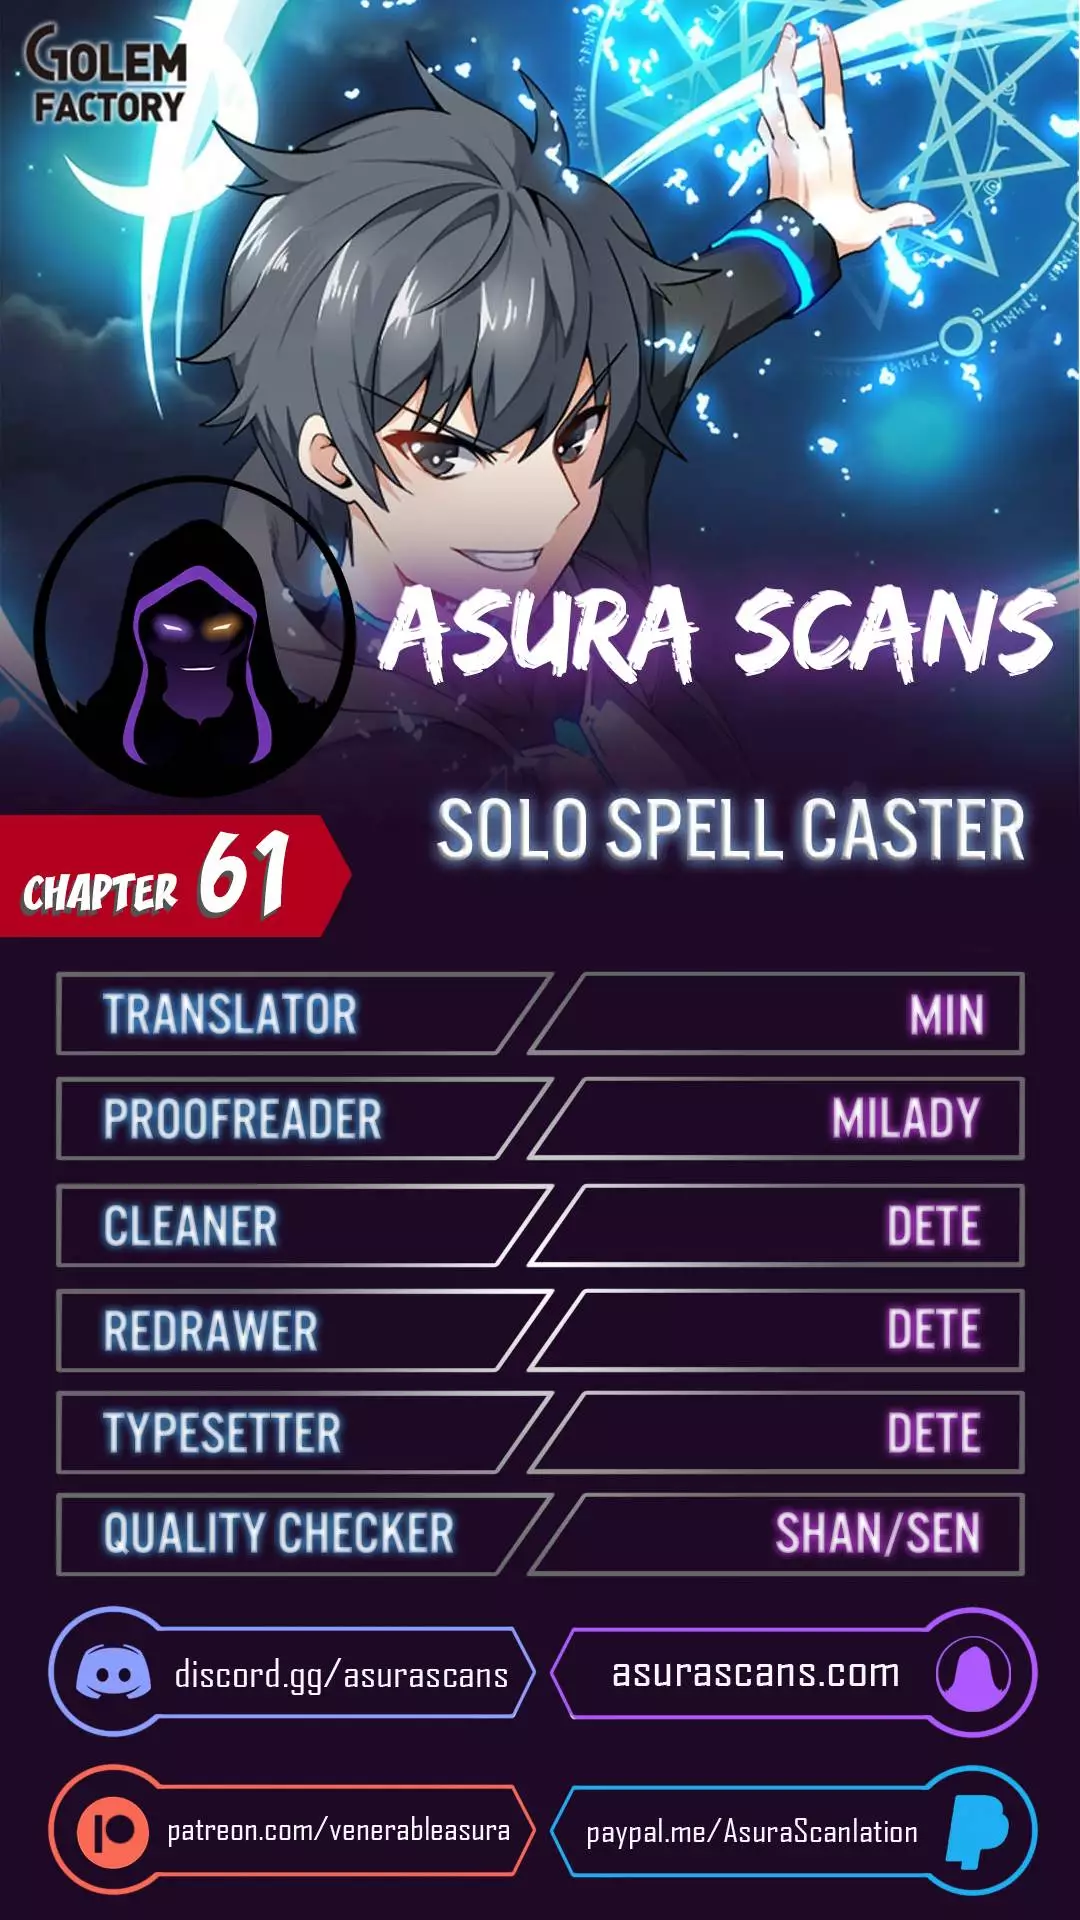 Solo Spell Caster - 61 page 1